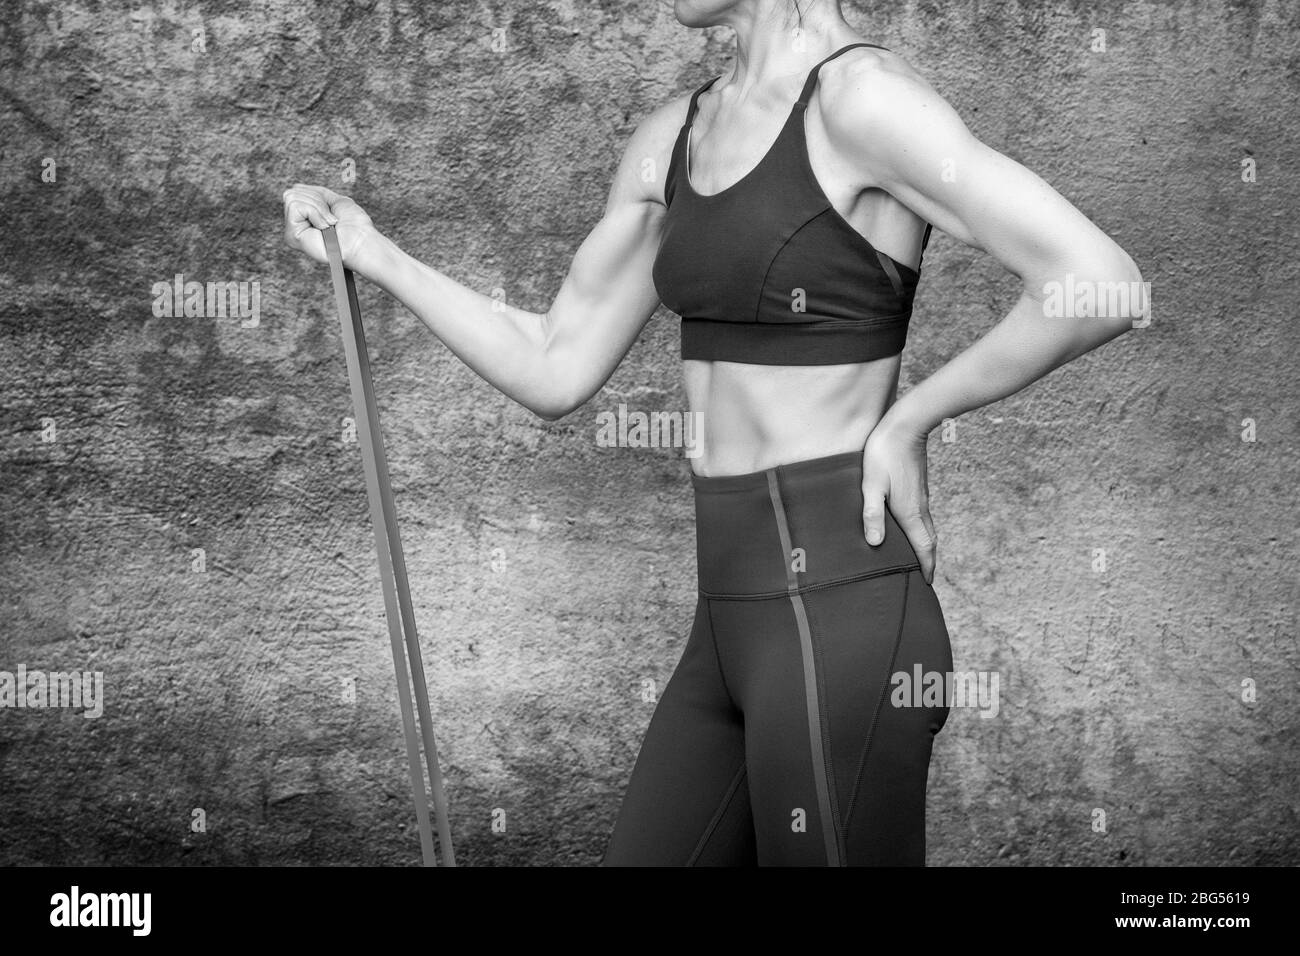 Close up of a woman using a resistance band to keep fit and exercise Stock Photo